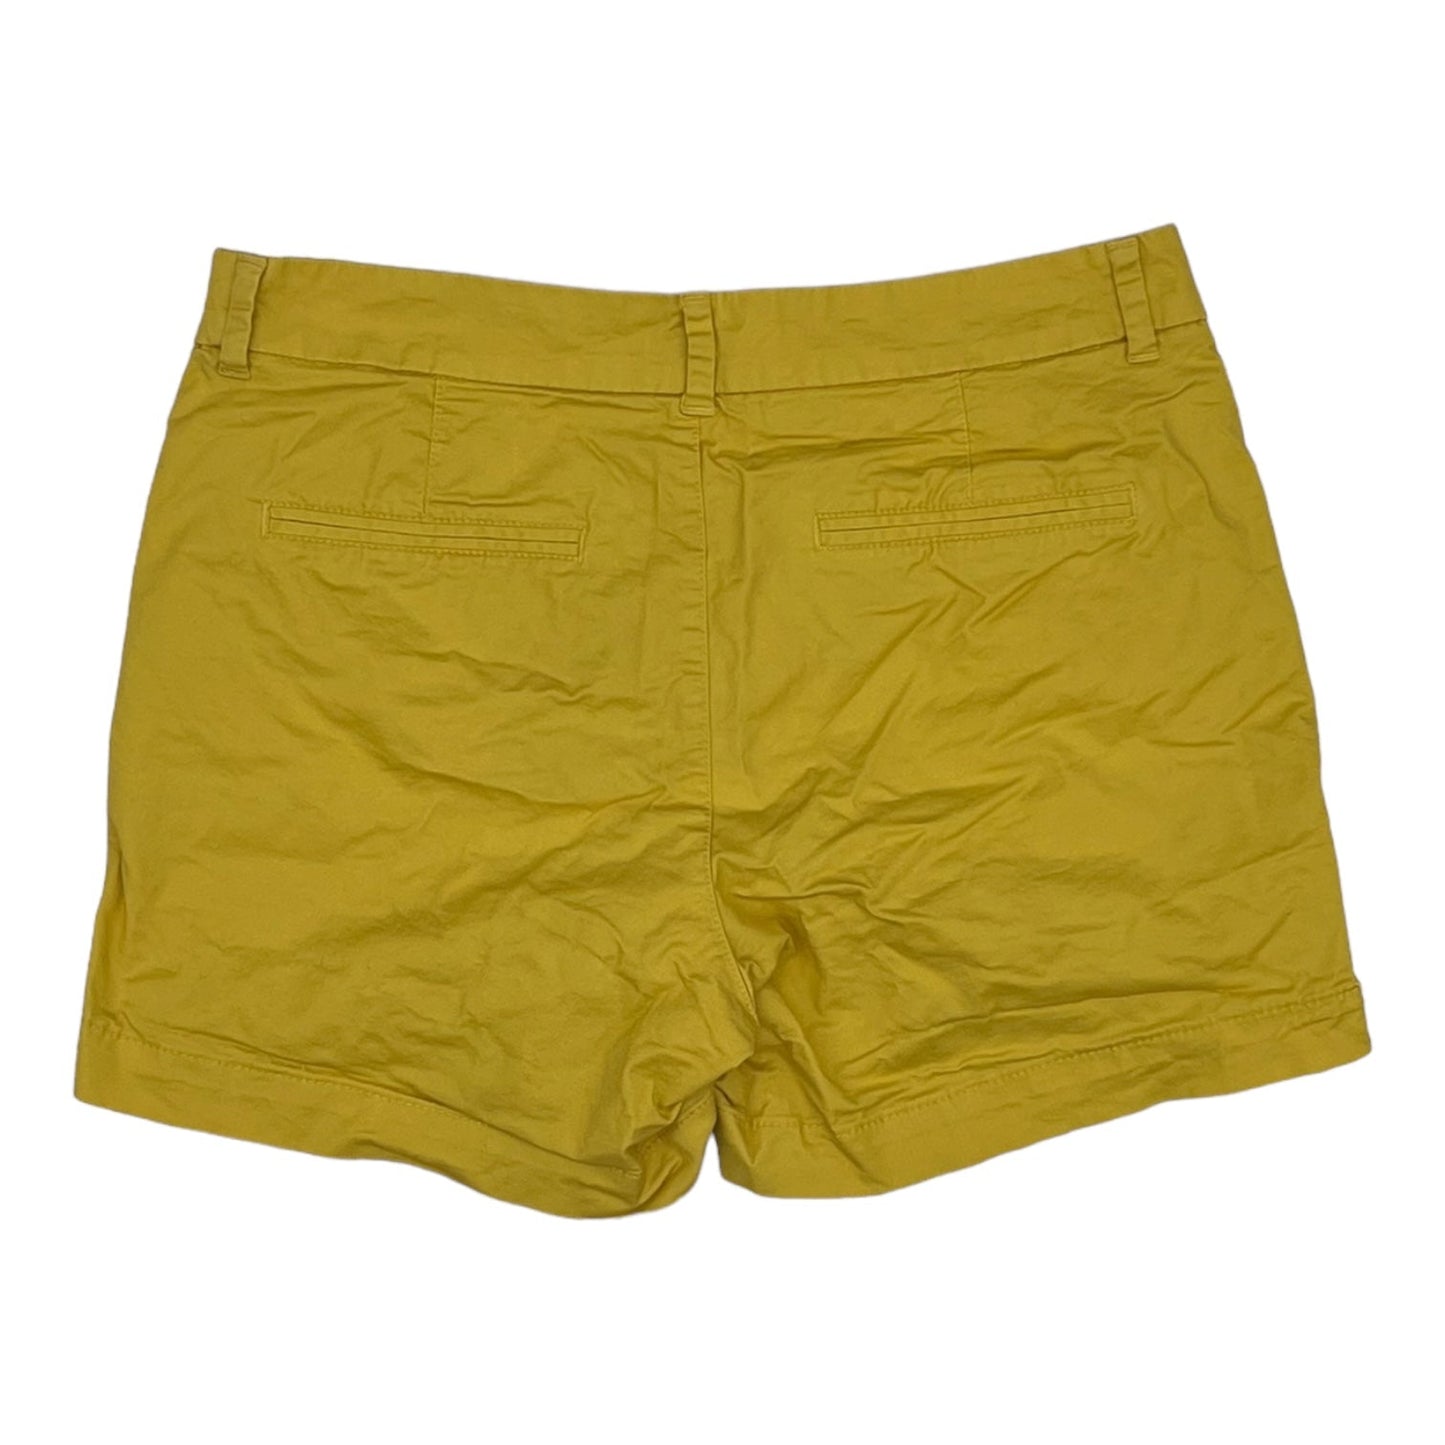 YELLOW SHORTS by OLD NAVY Size:10